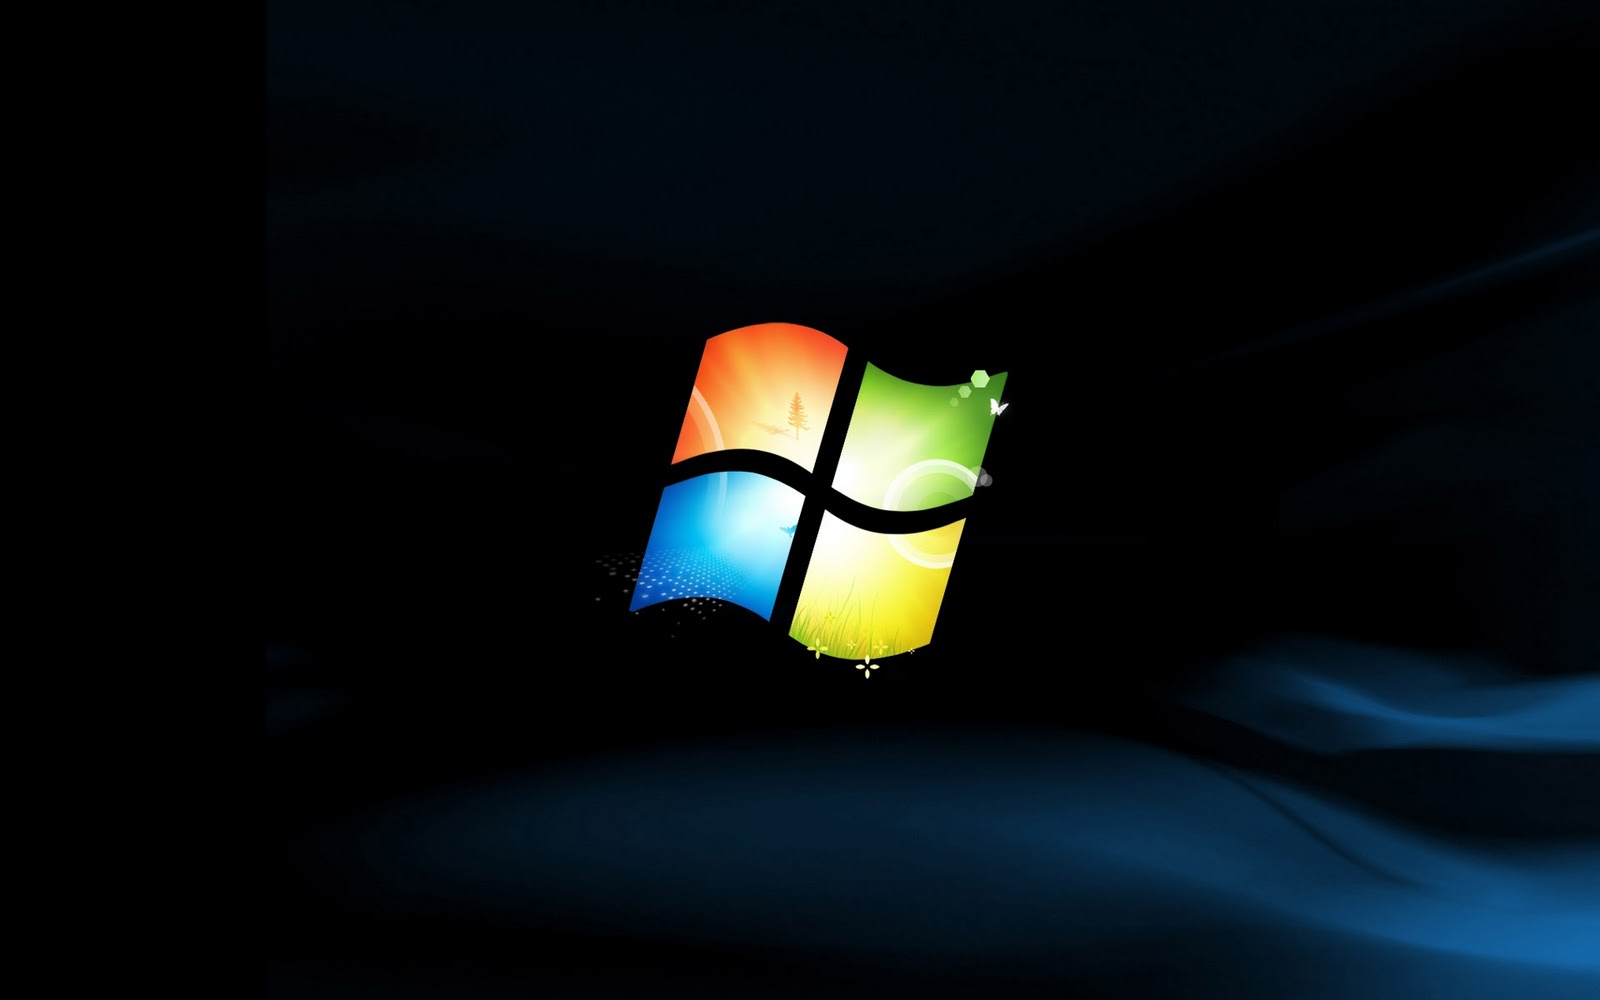 laptop wallpapers hd for windows 7,light,sky,darkness,operating system,graphics